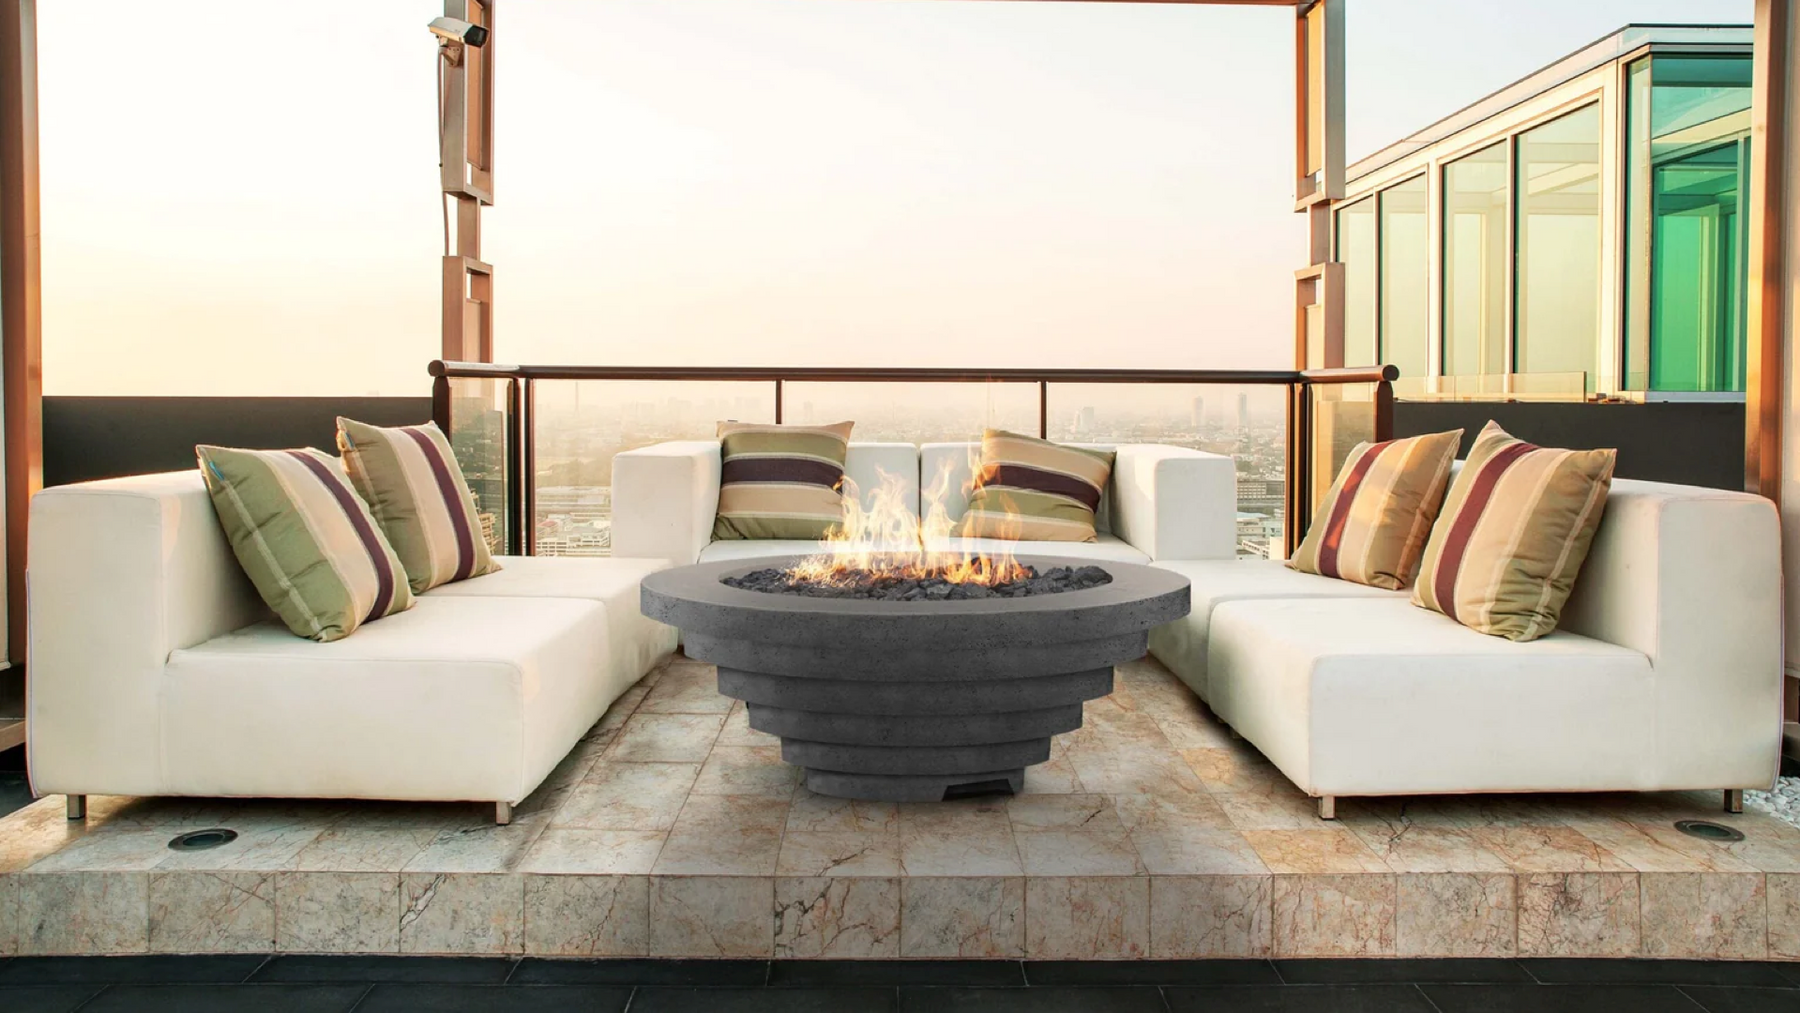 A tiered concrete fire pit flanked by white sofas is the focal point of this outdoor lounge space. 